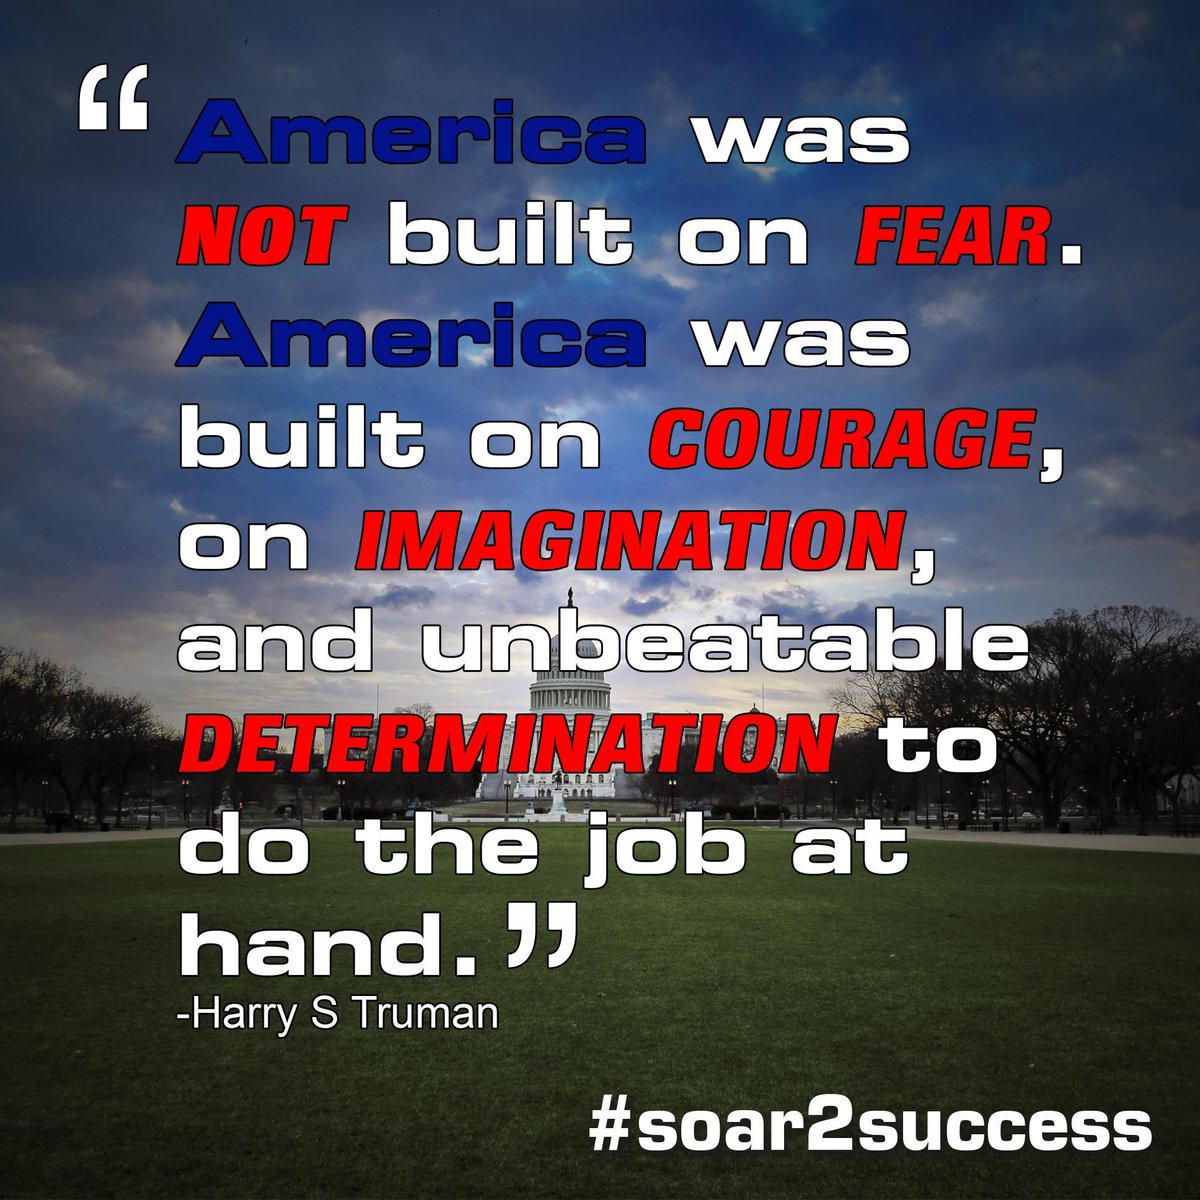 ''America was not built on fear, America was built on courage, on Imagination, and unbeatable determination to do the job at hand. - Harry S Truman #Leadership #Pilotspeaker #Soar2Success